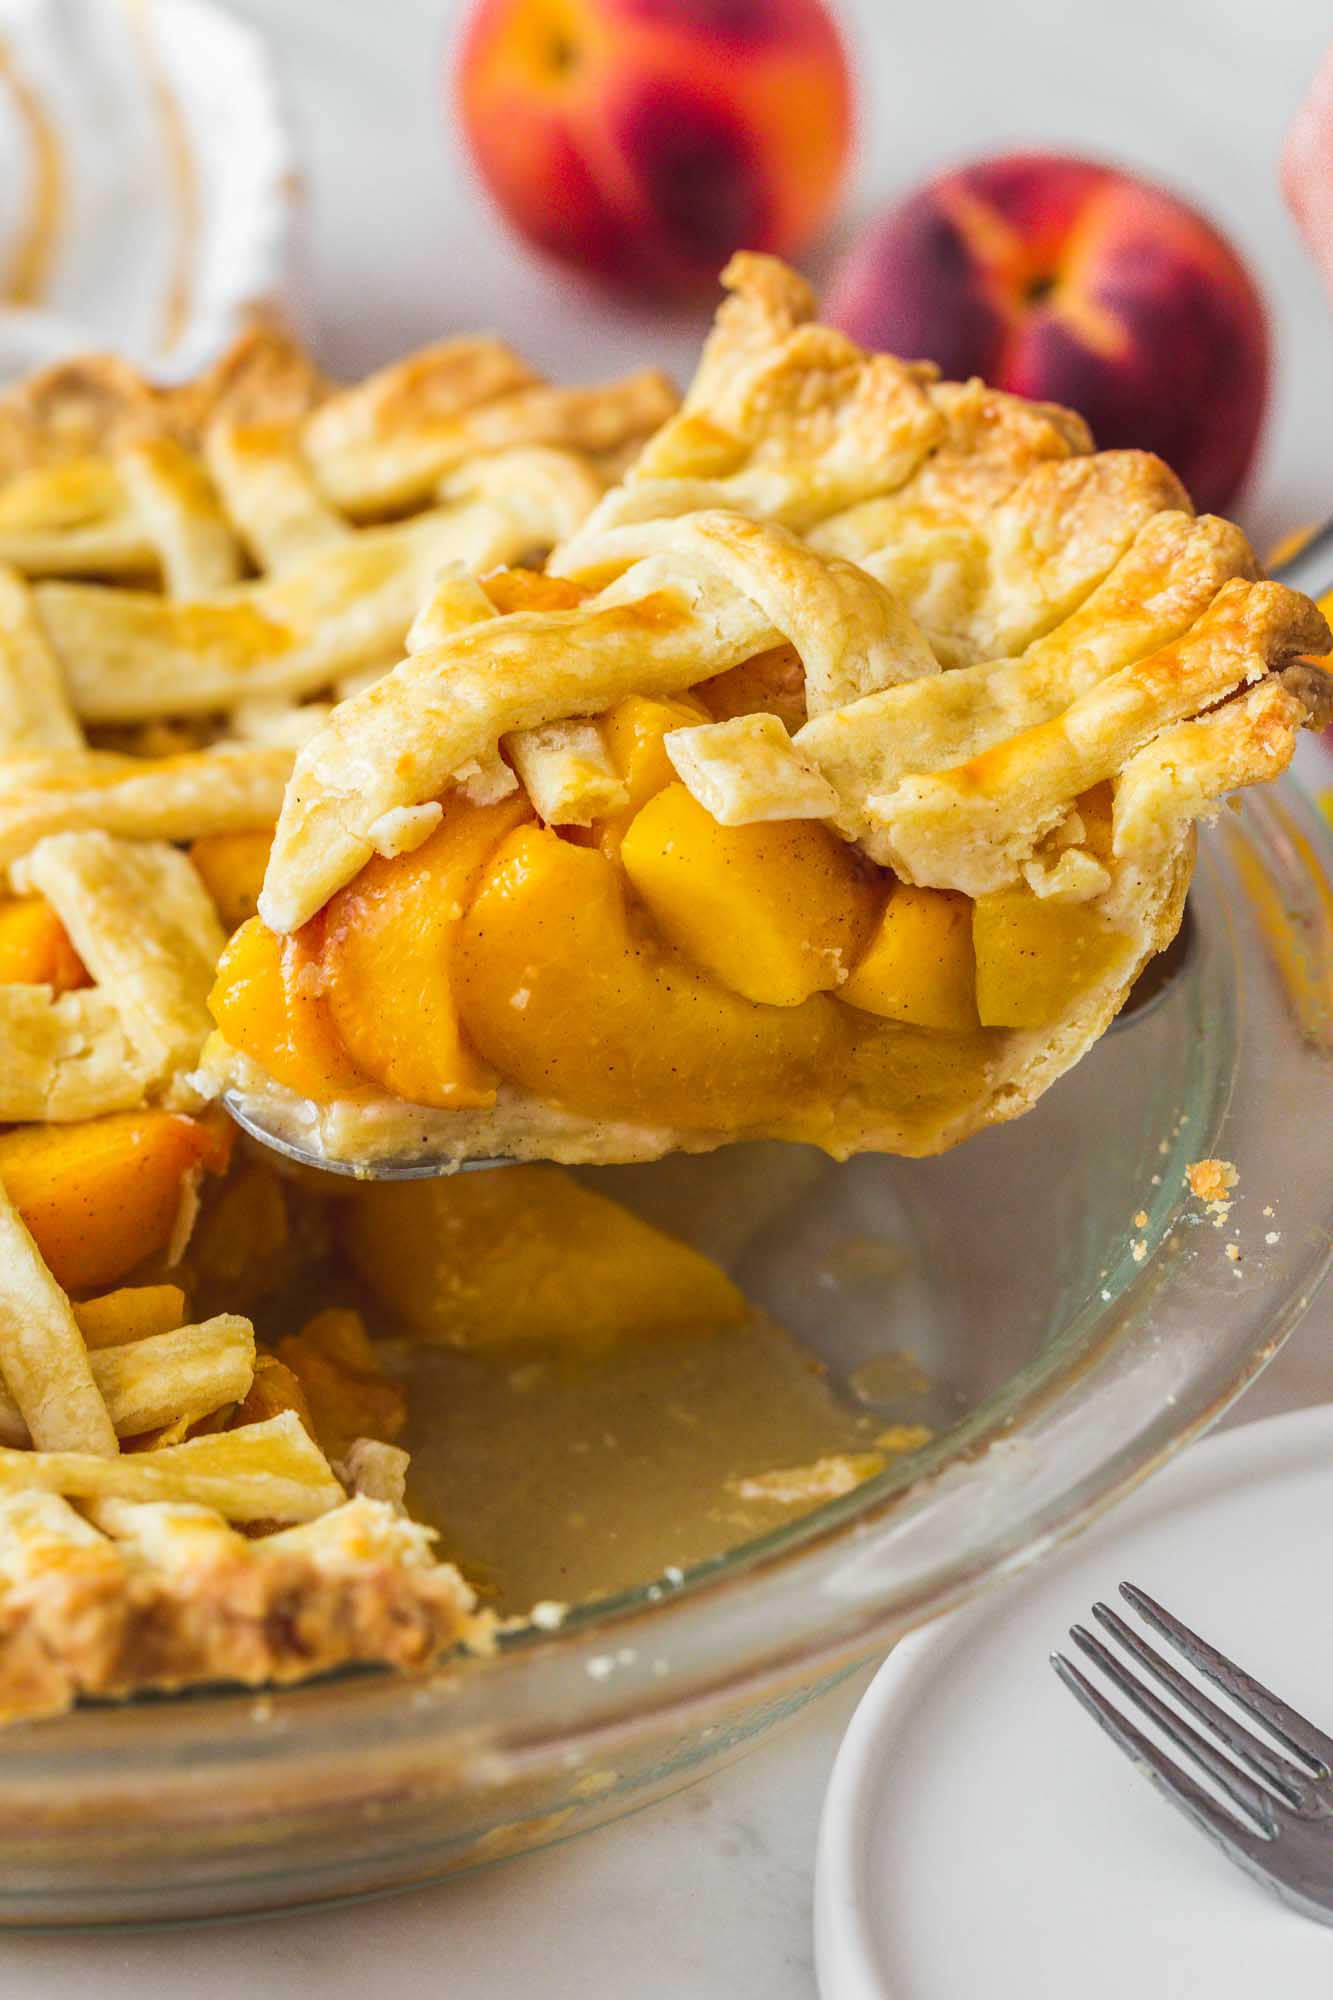 Taking a slice of peach pie from the pie dish